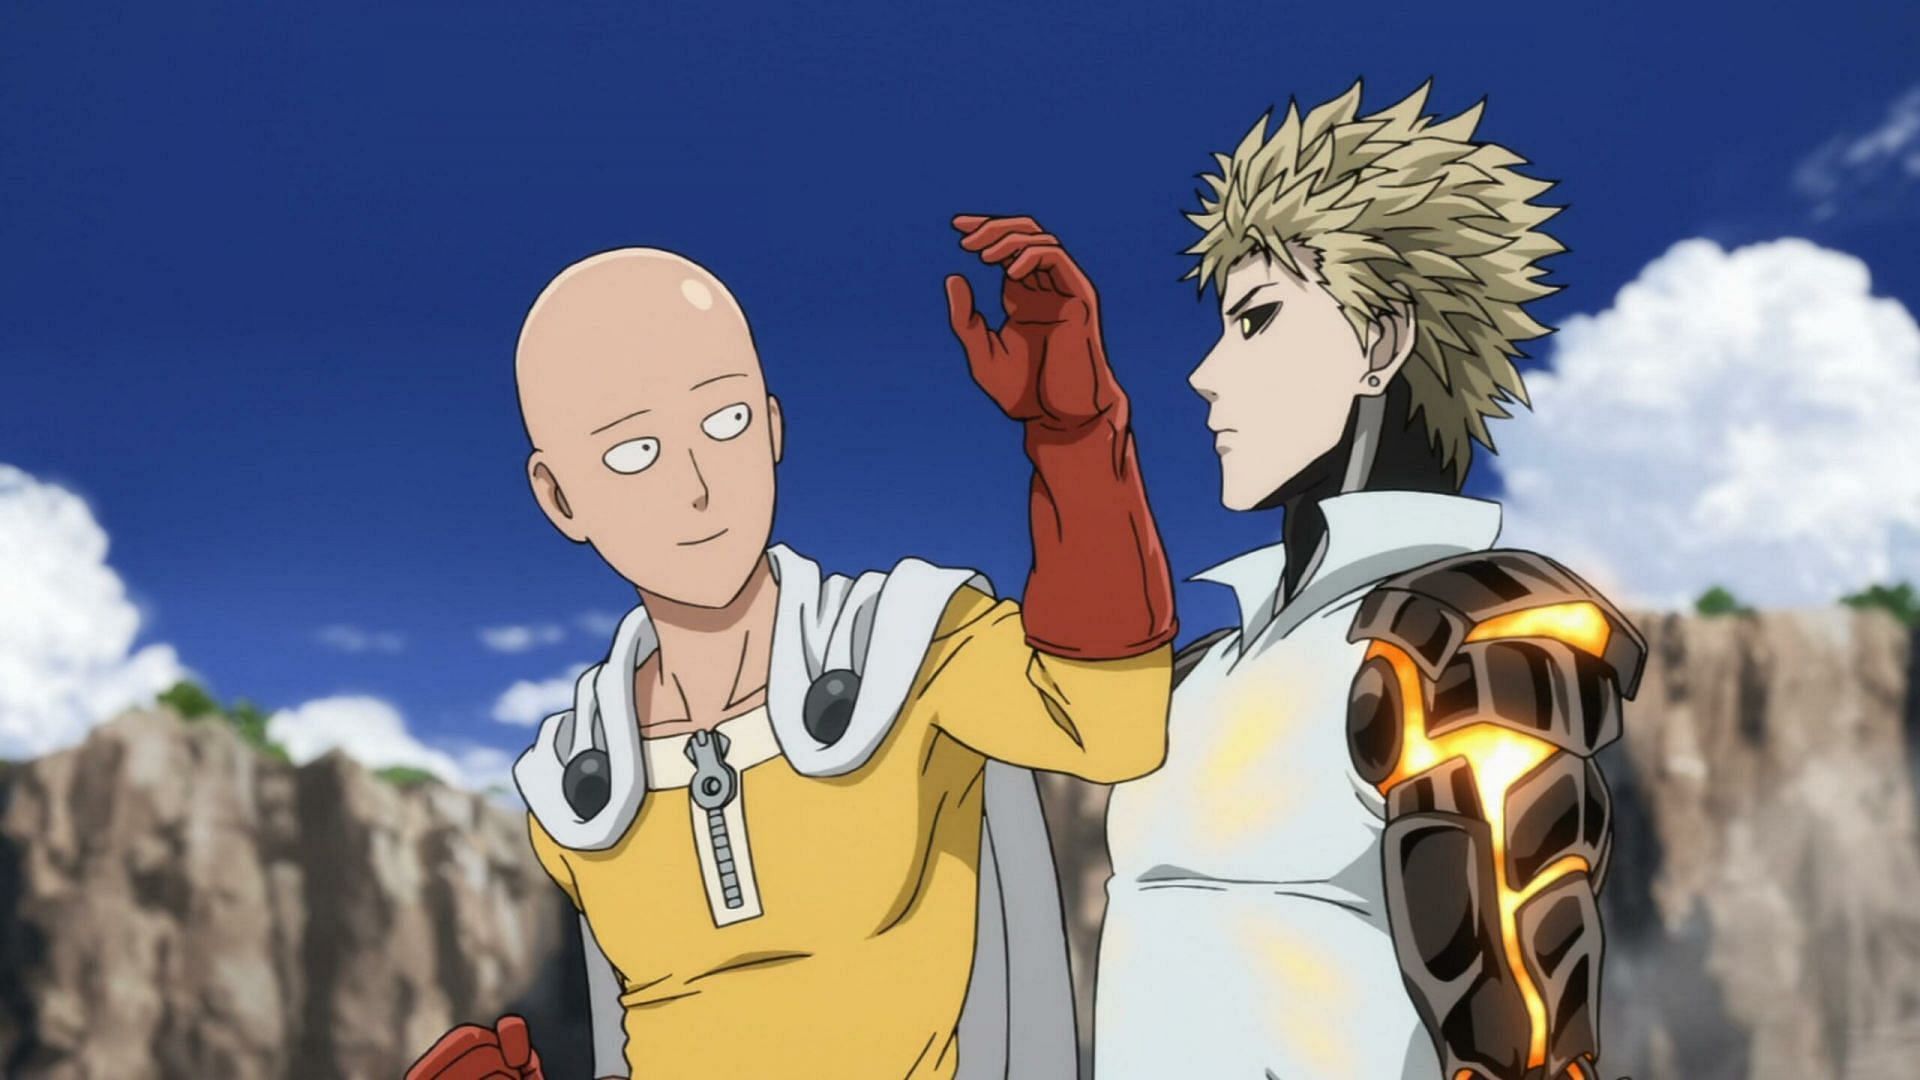 Taking a look at the release details of One Punch Man chapter 185 (Image via Madhouse)